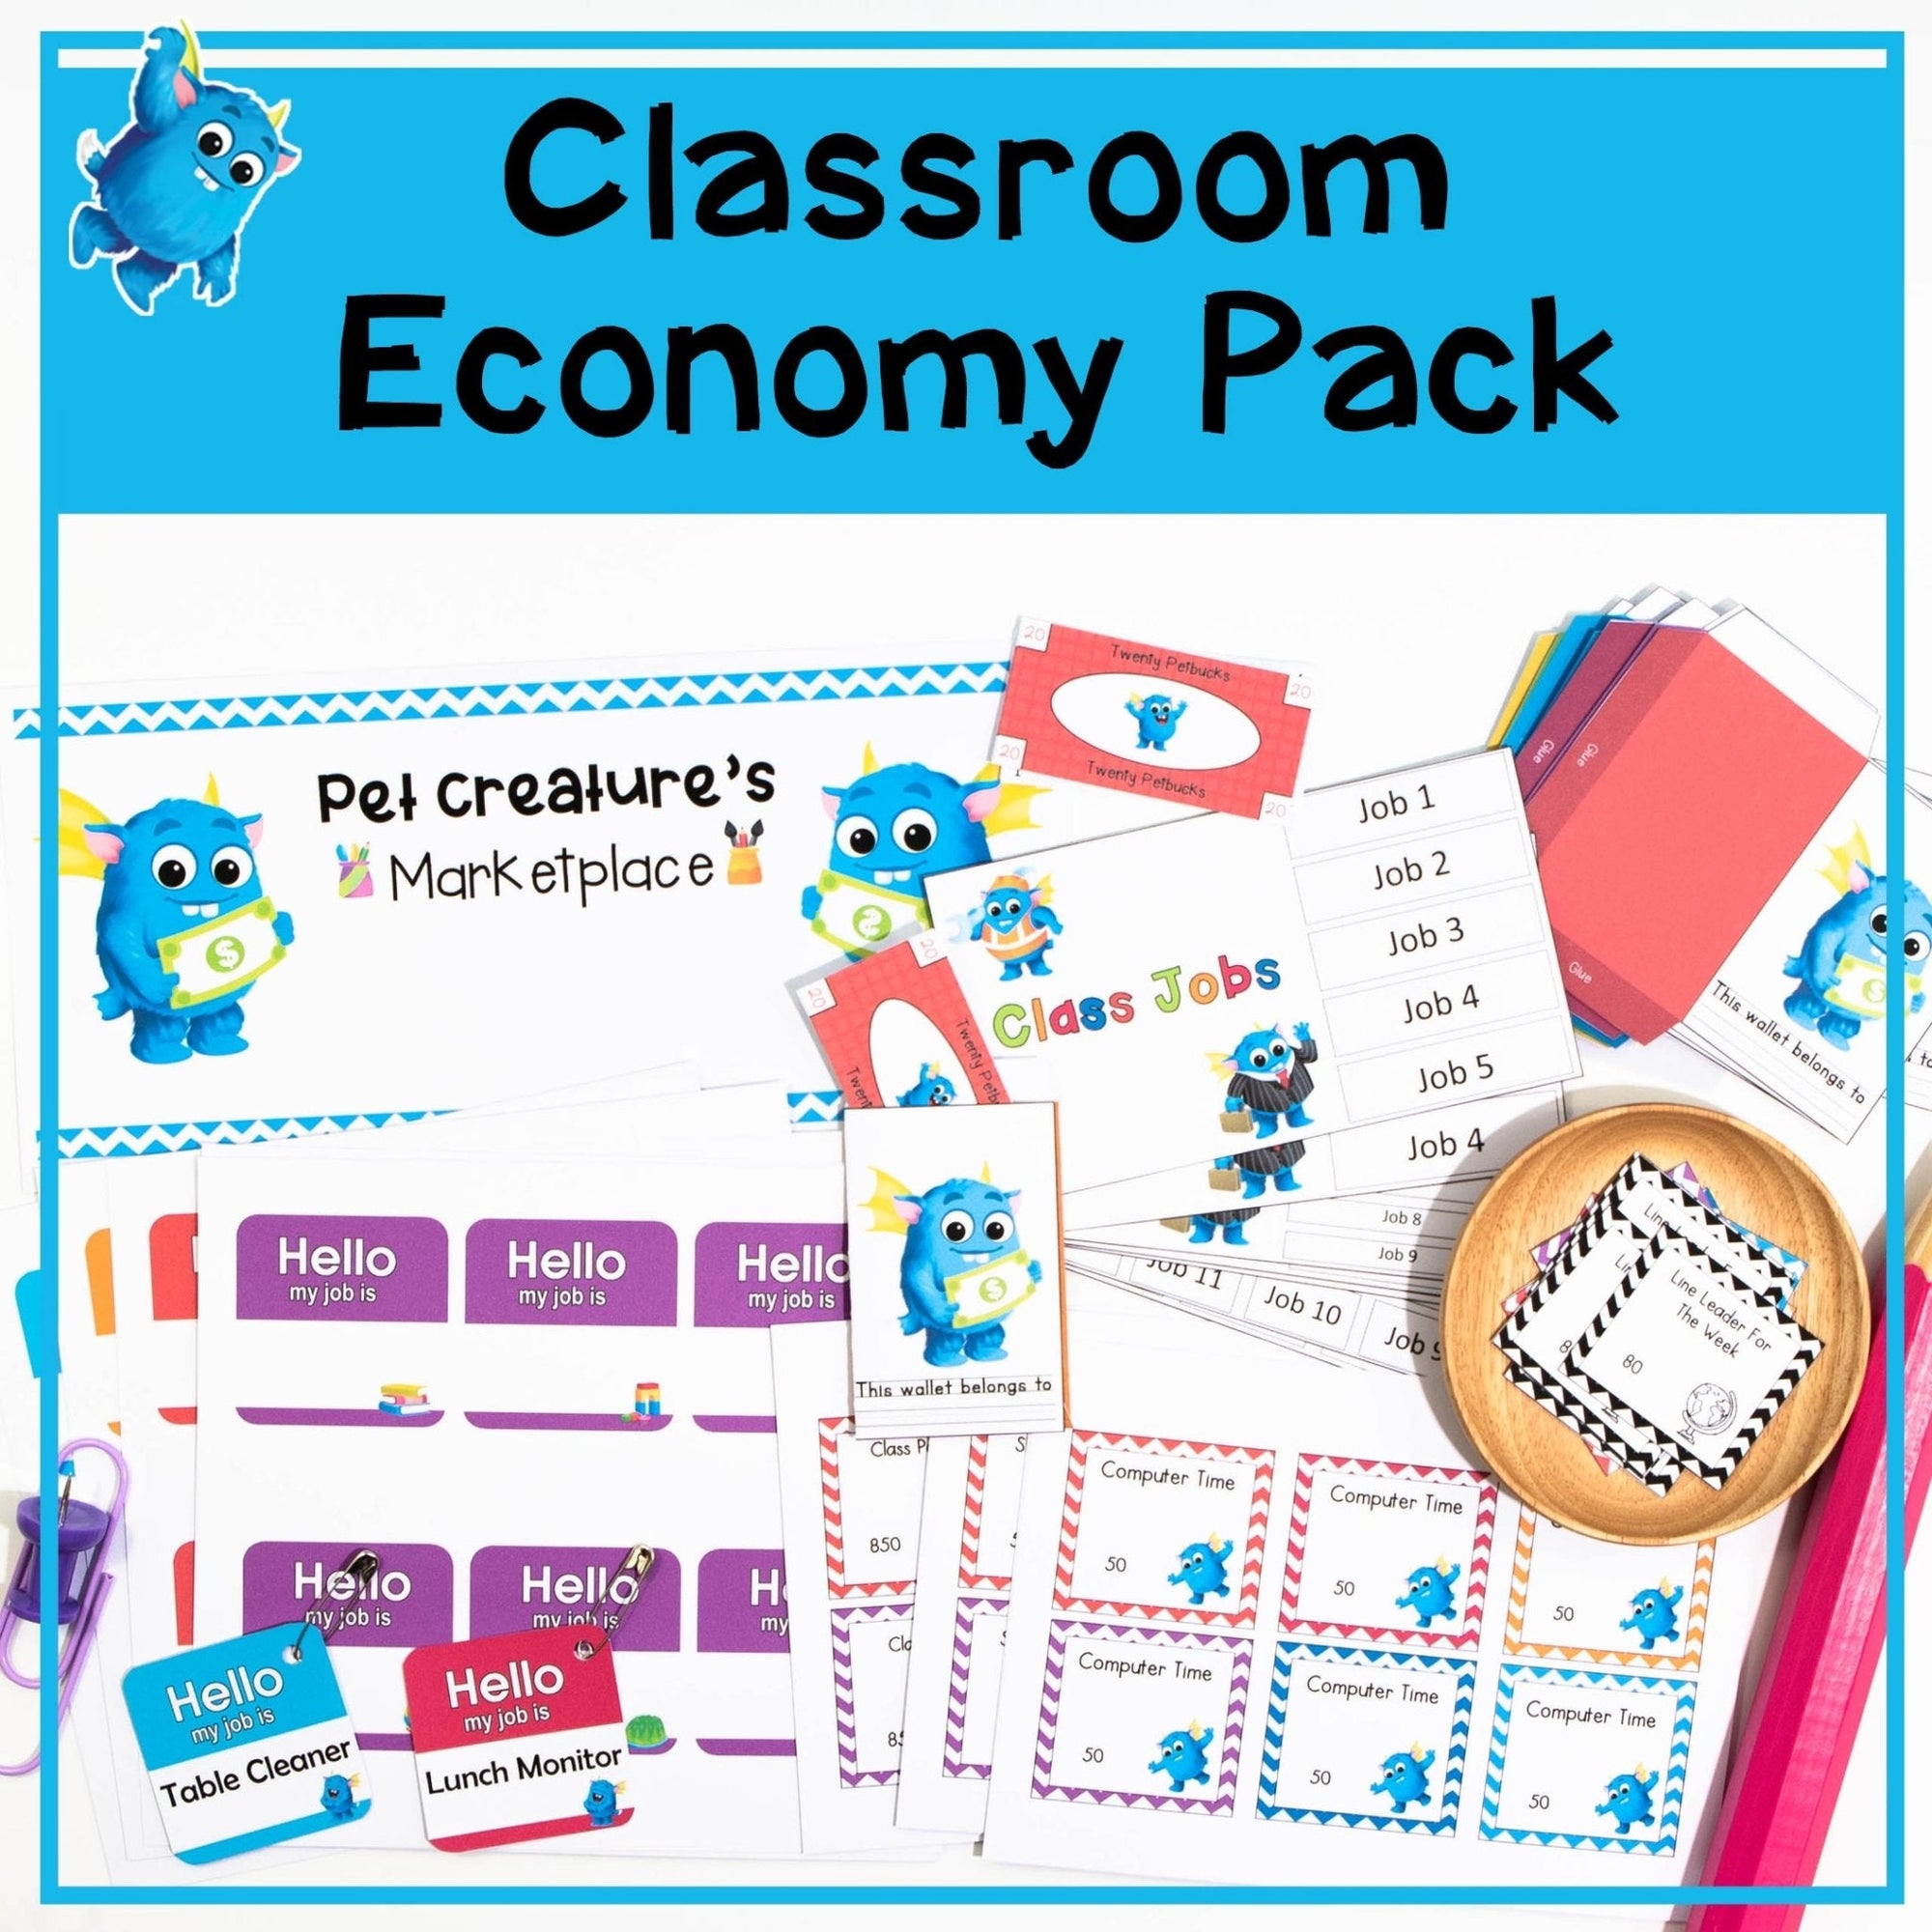 Classroom Economy Pack - Printable Marketplace with Currency Rewards & Job Cards - Your Teacher's Pet Creature